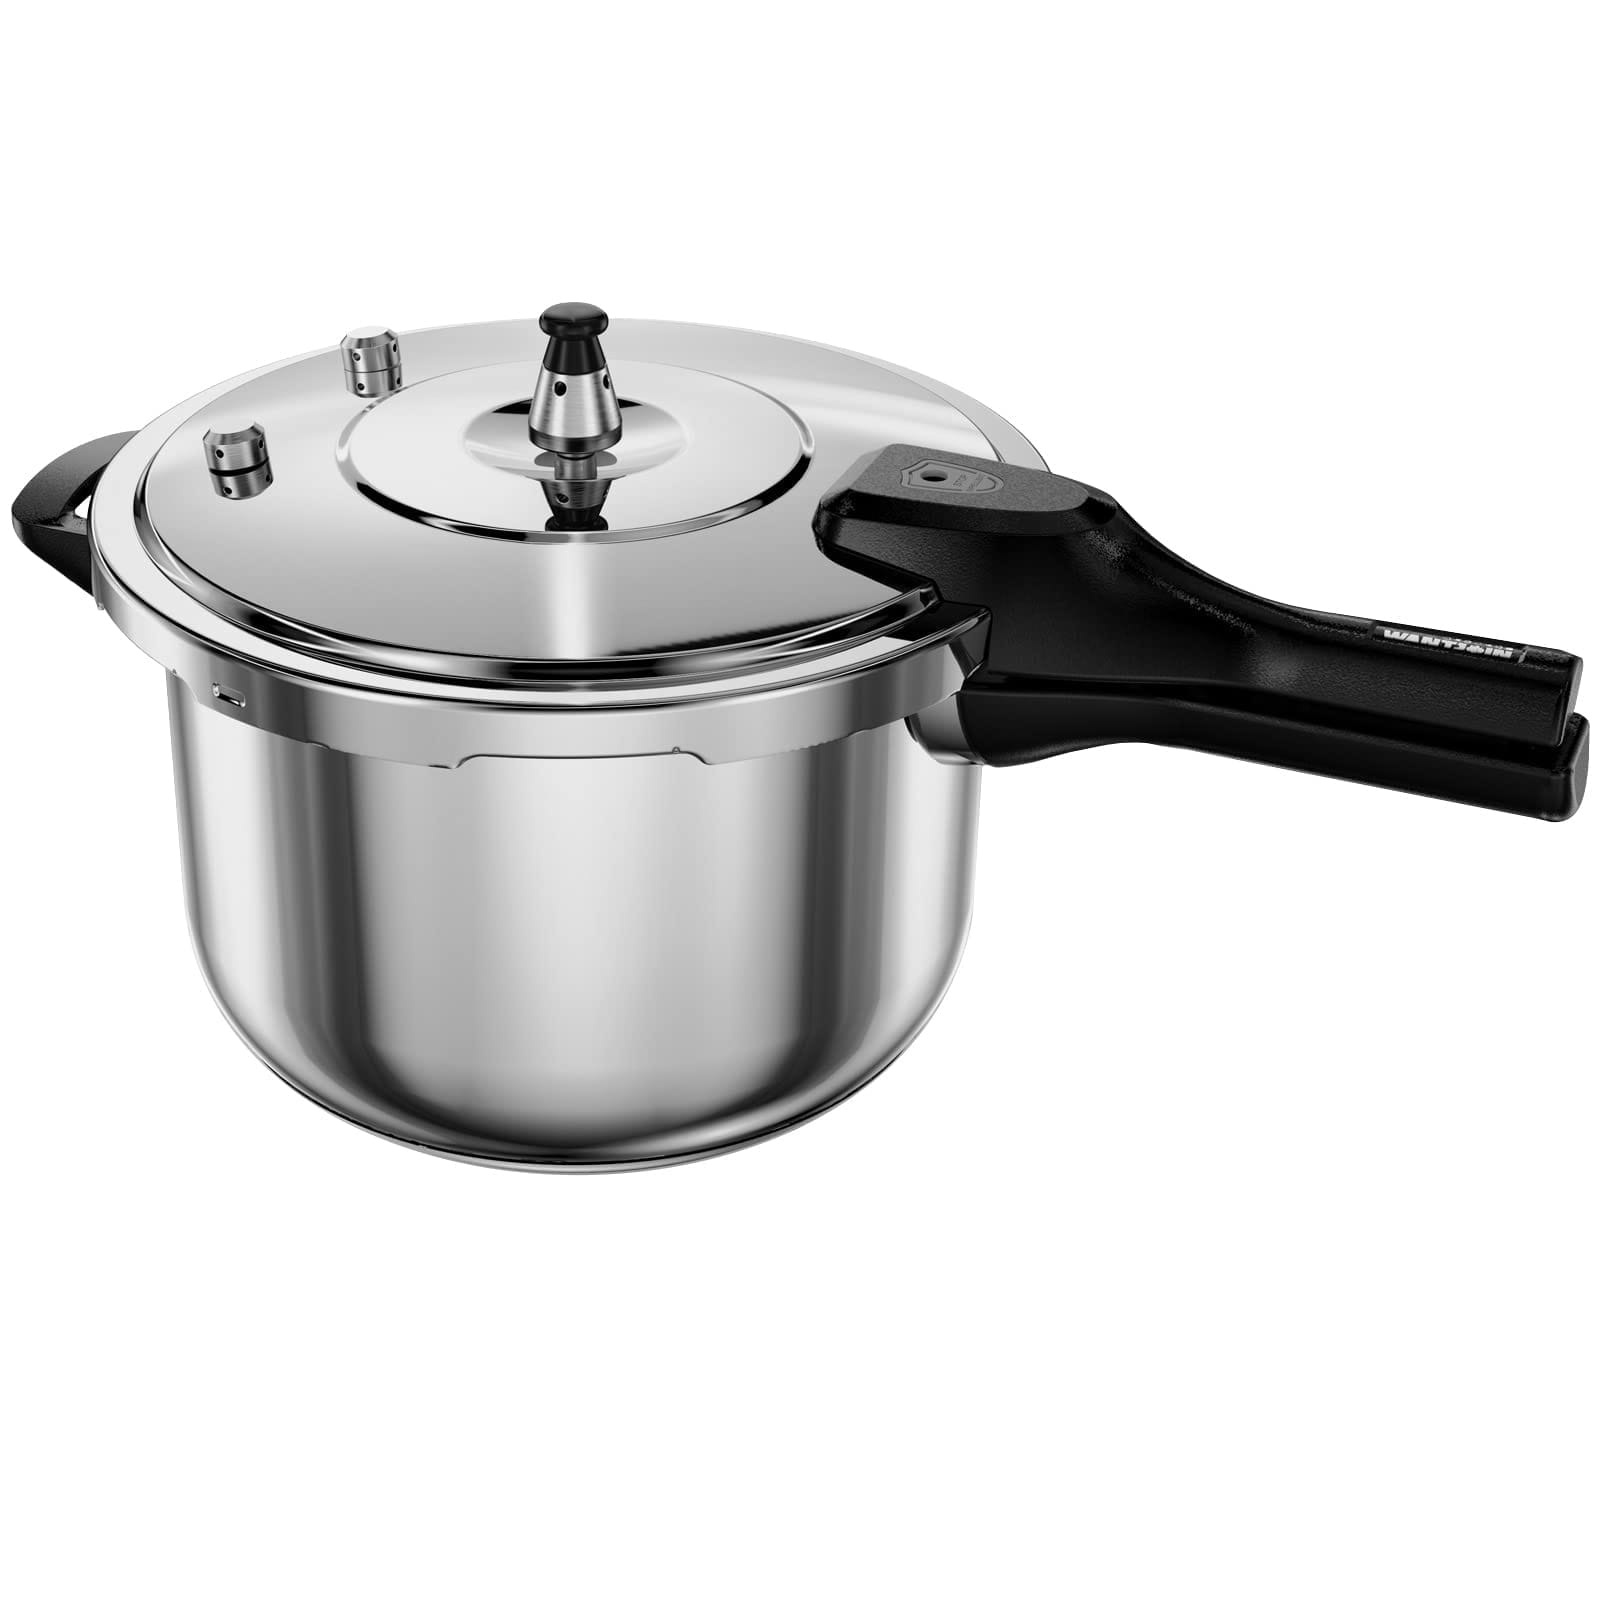 10 best stainless steel pressure cookers tested reviewed 1145 27 9